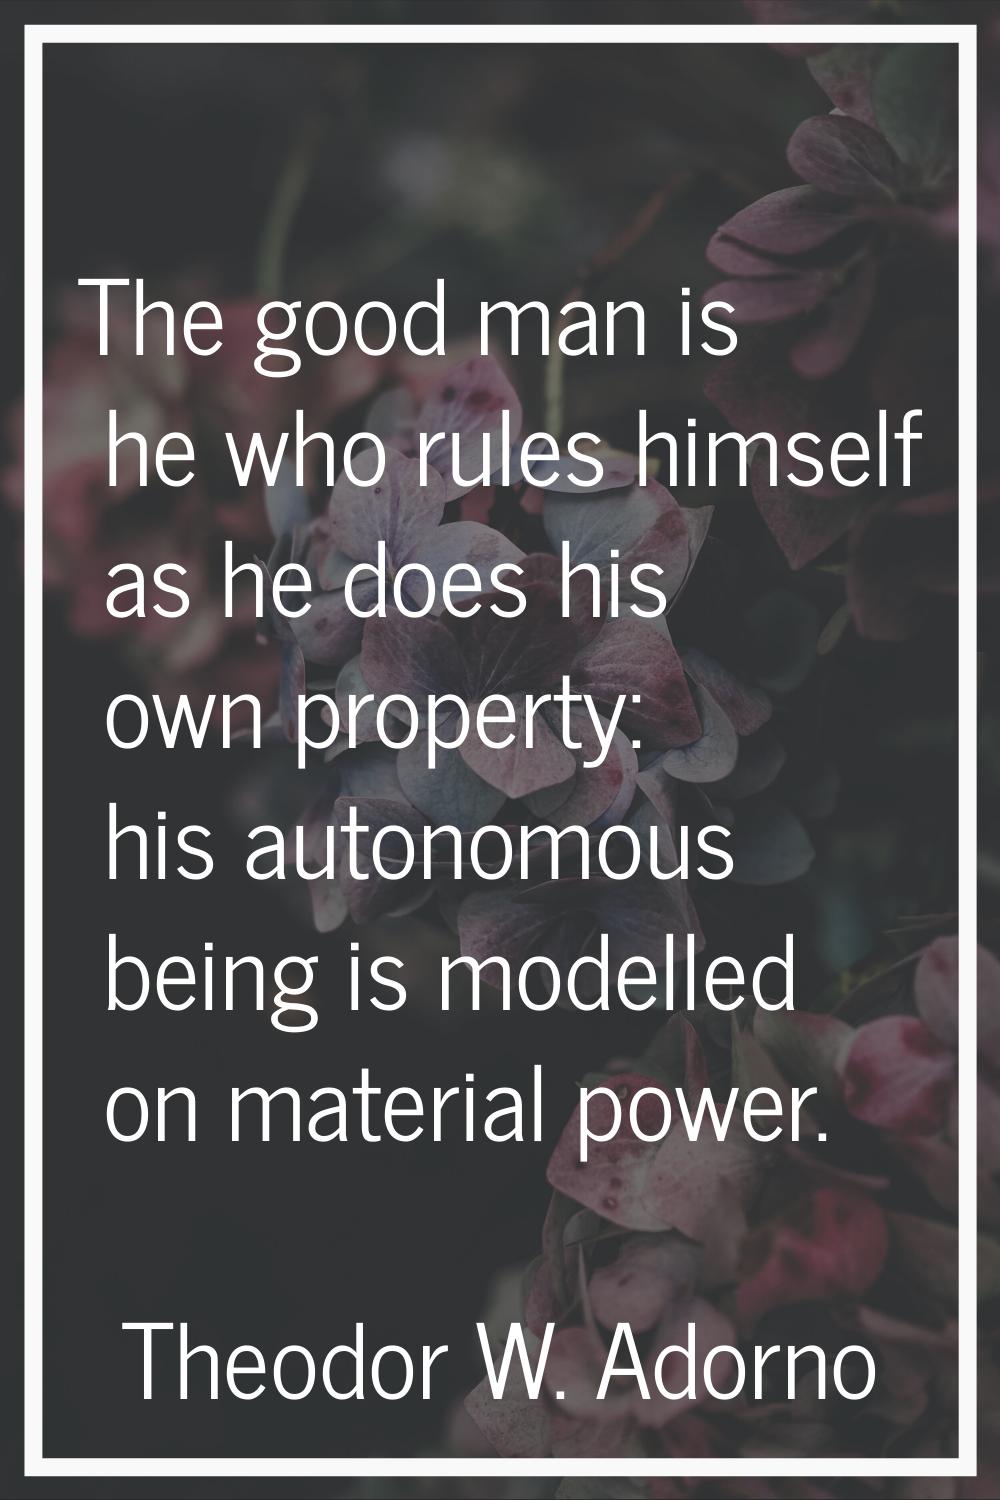 The good man is he who rules himself as he does his own property: his autonomous being is modelled 